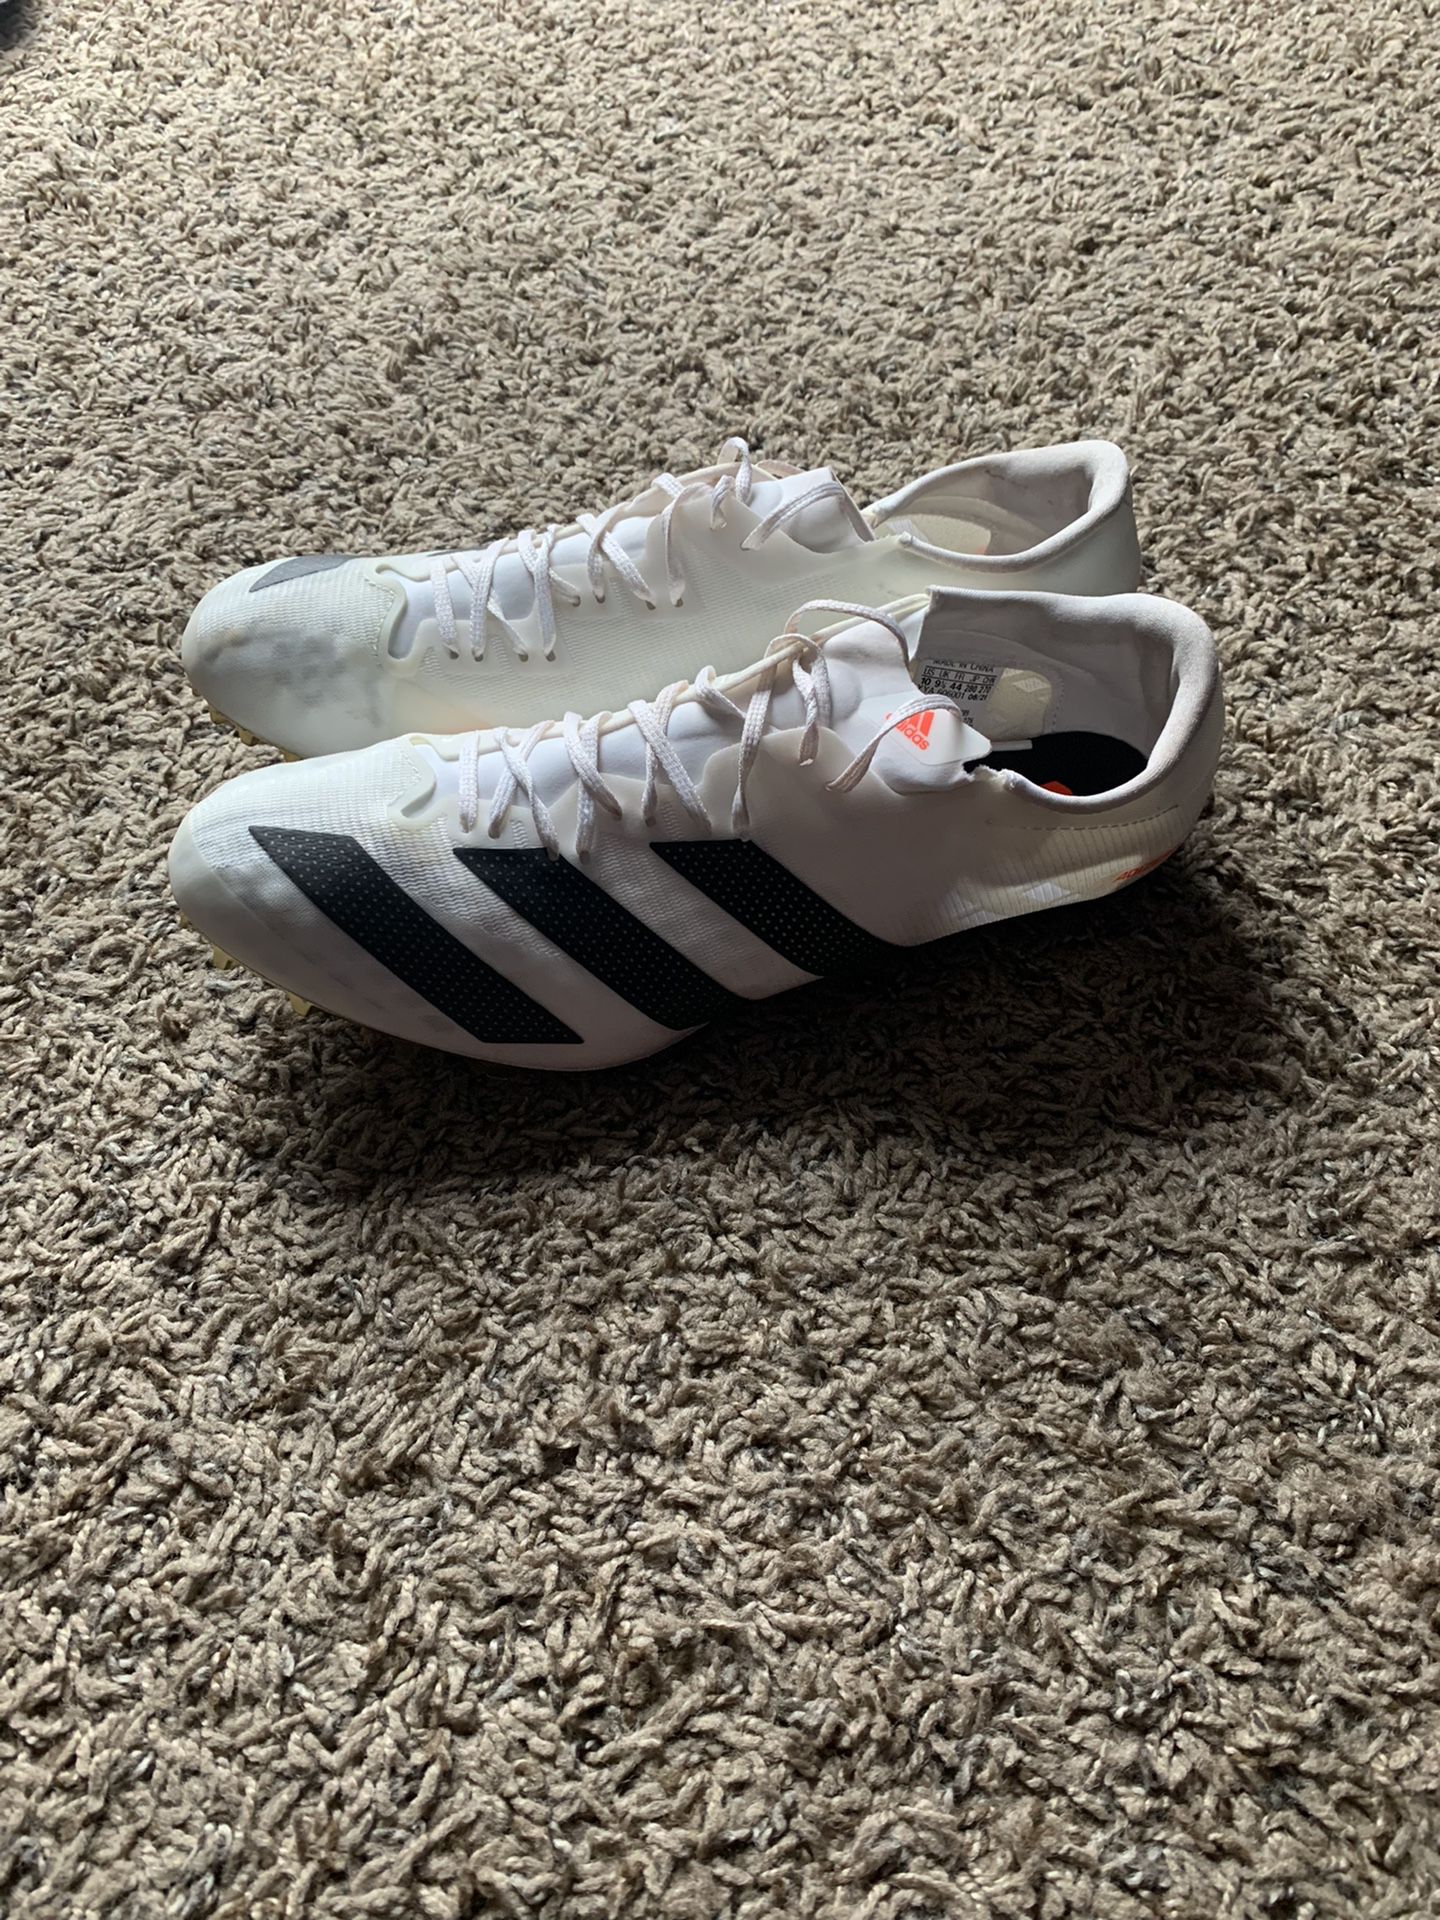 Adidas Prime Sprint Spikes 'Tokyo' for Sale in Austell, GA - OfferUp